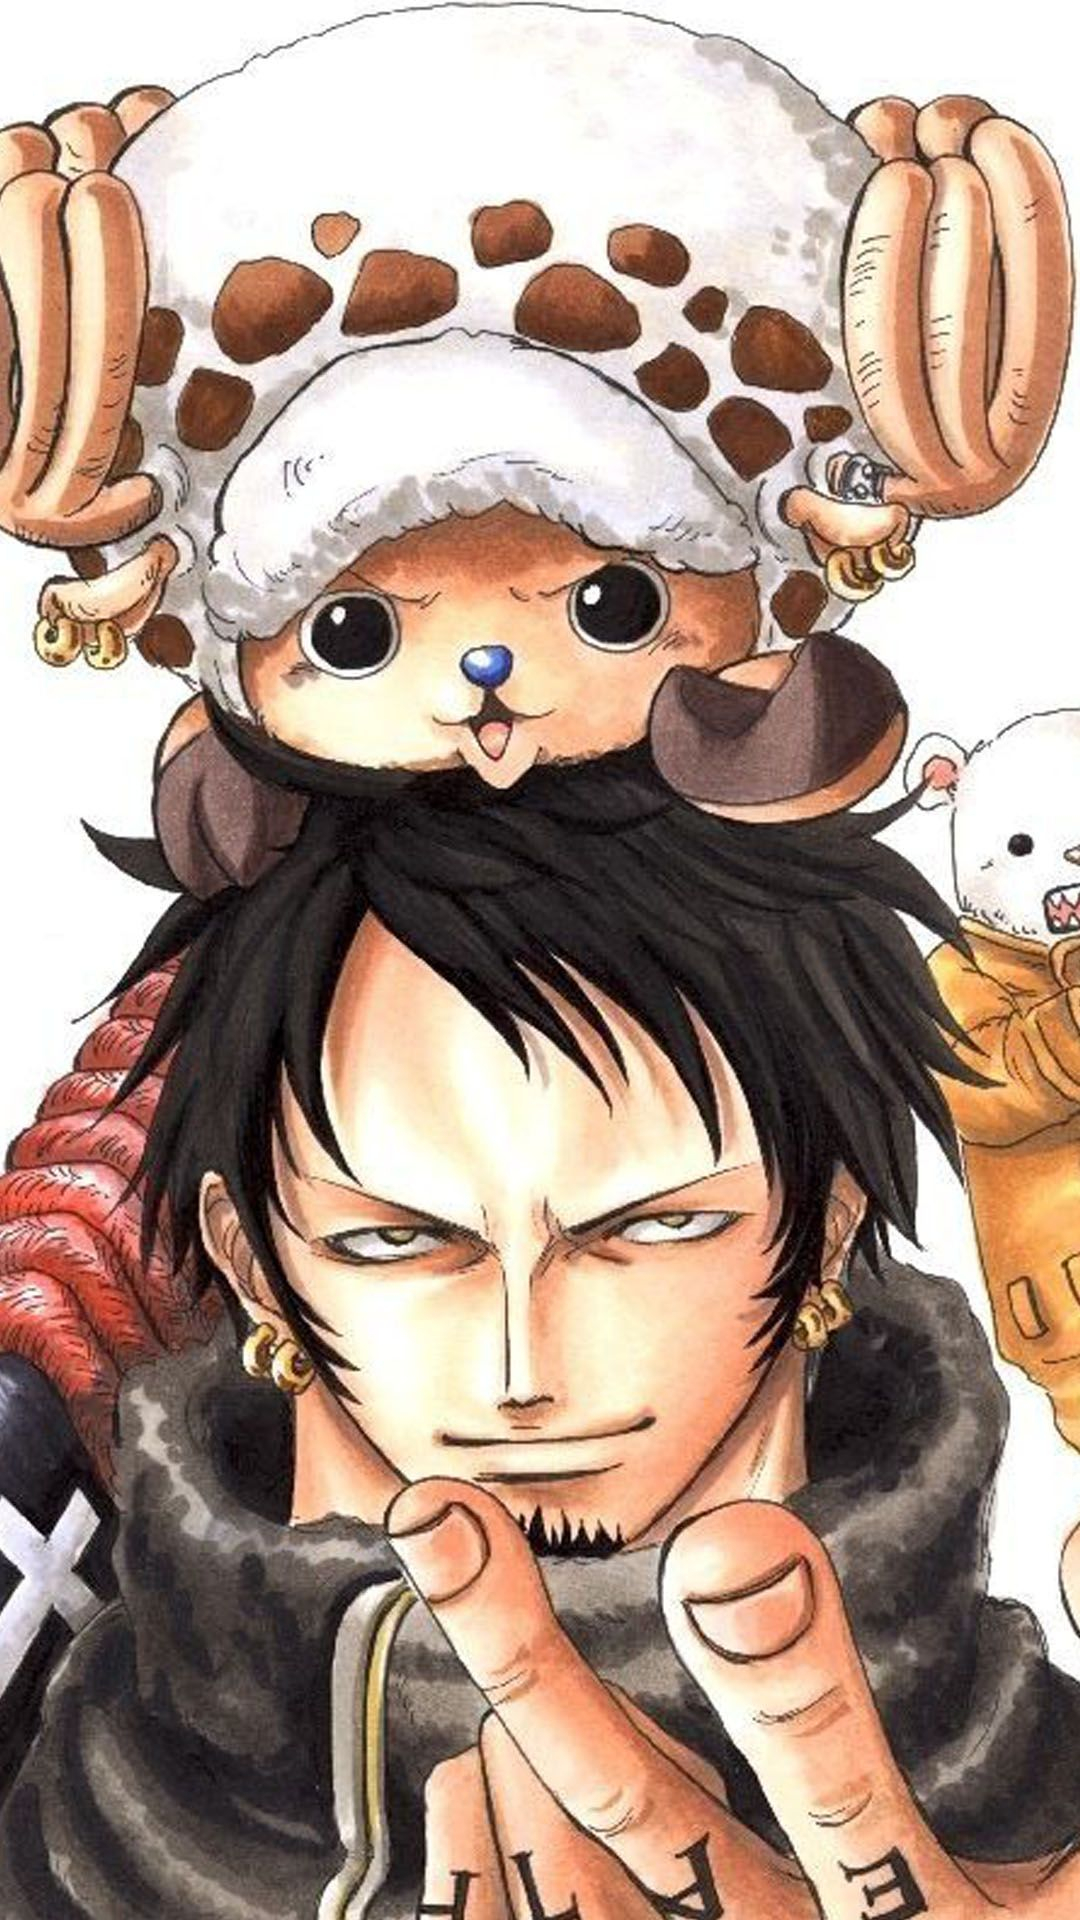 1080x1920 Law wallpaper 31 | One piece chopper, One piece pictures, Anime